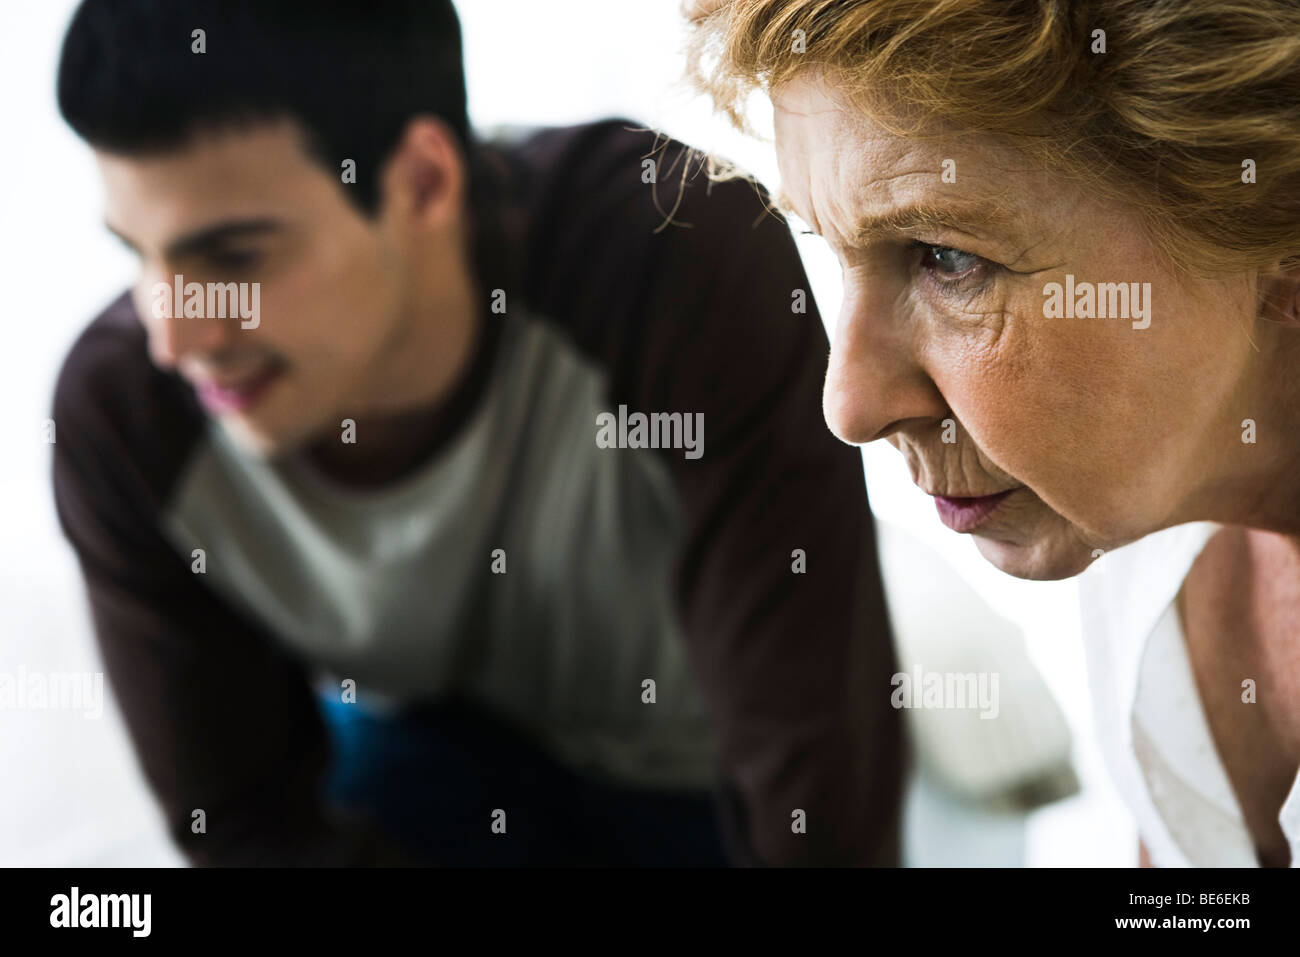 Senior woman looking intently, man in background Stock Photo